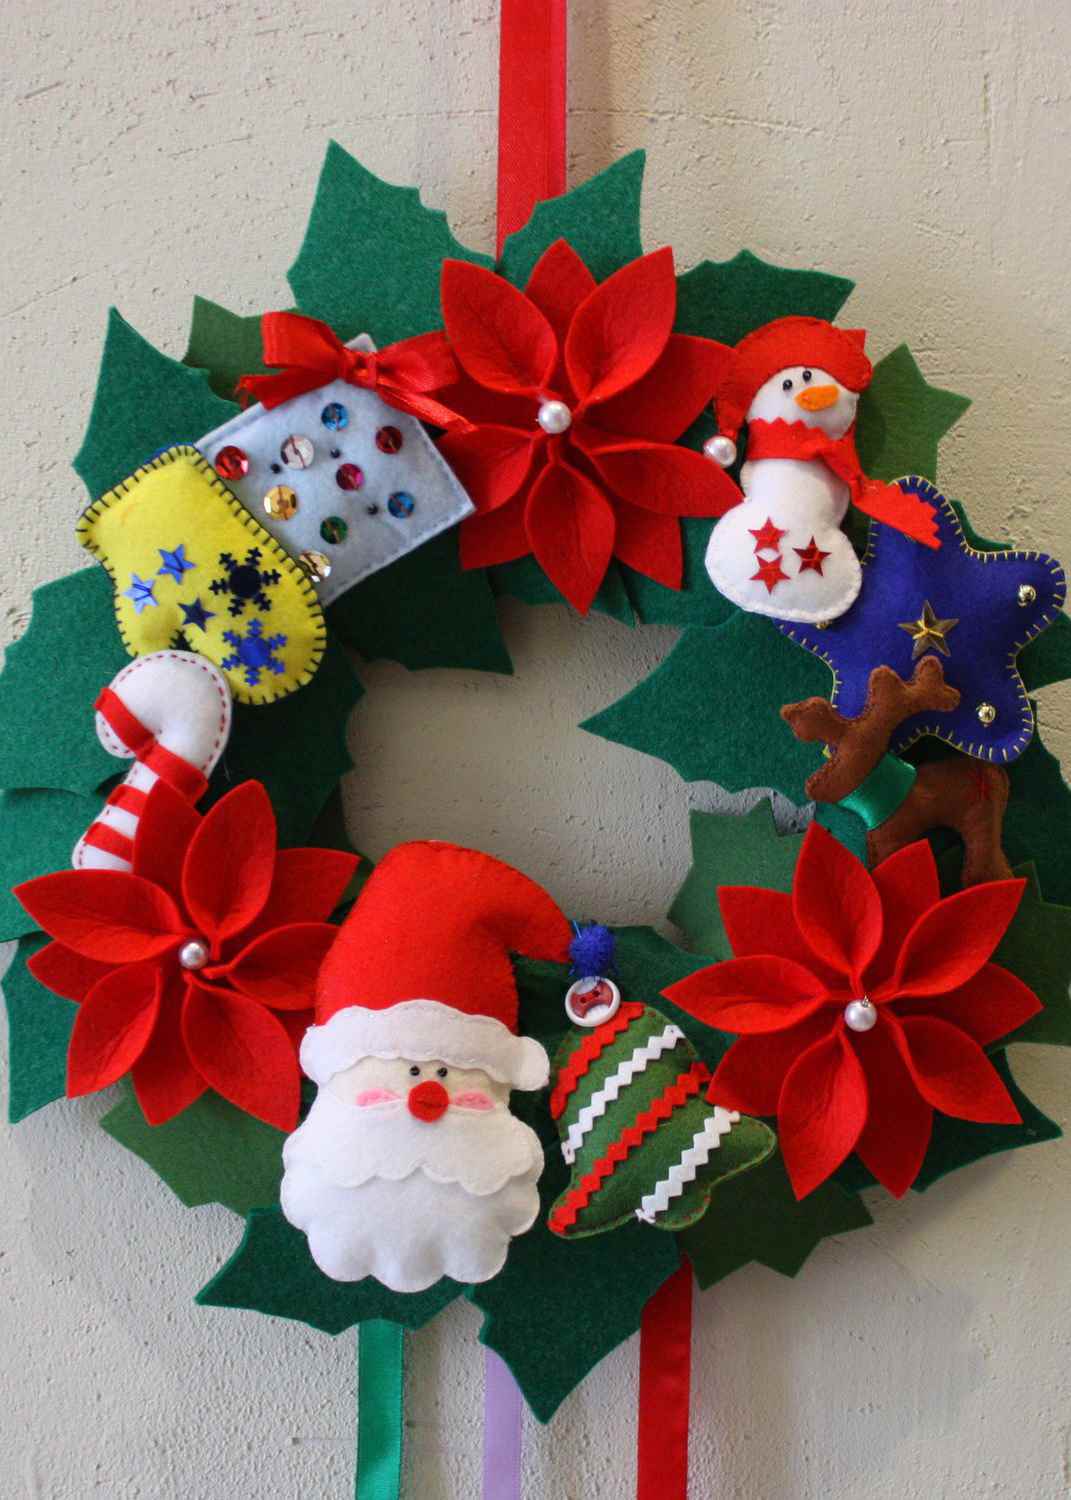 do-it-yourself version of the bright decor of the Christmas wreath